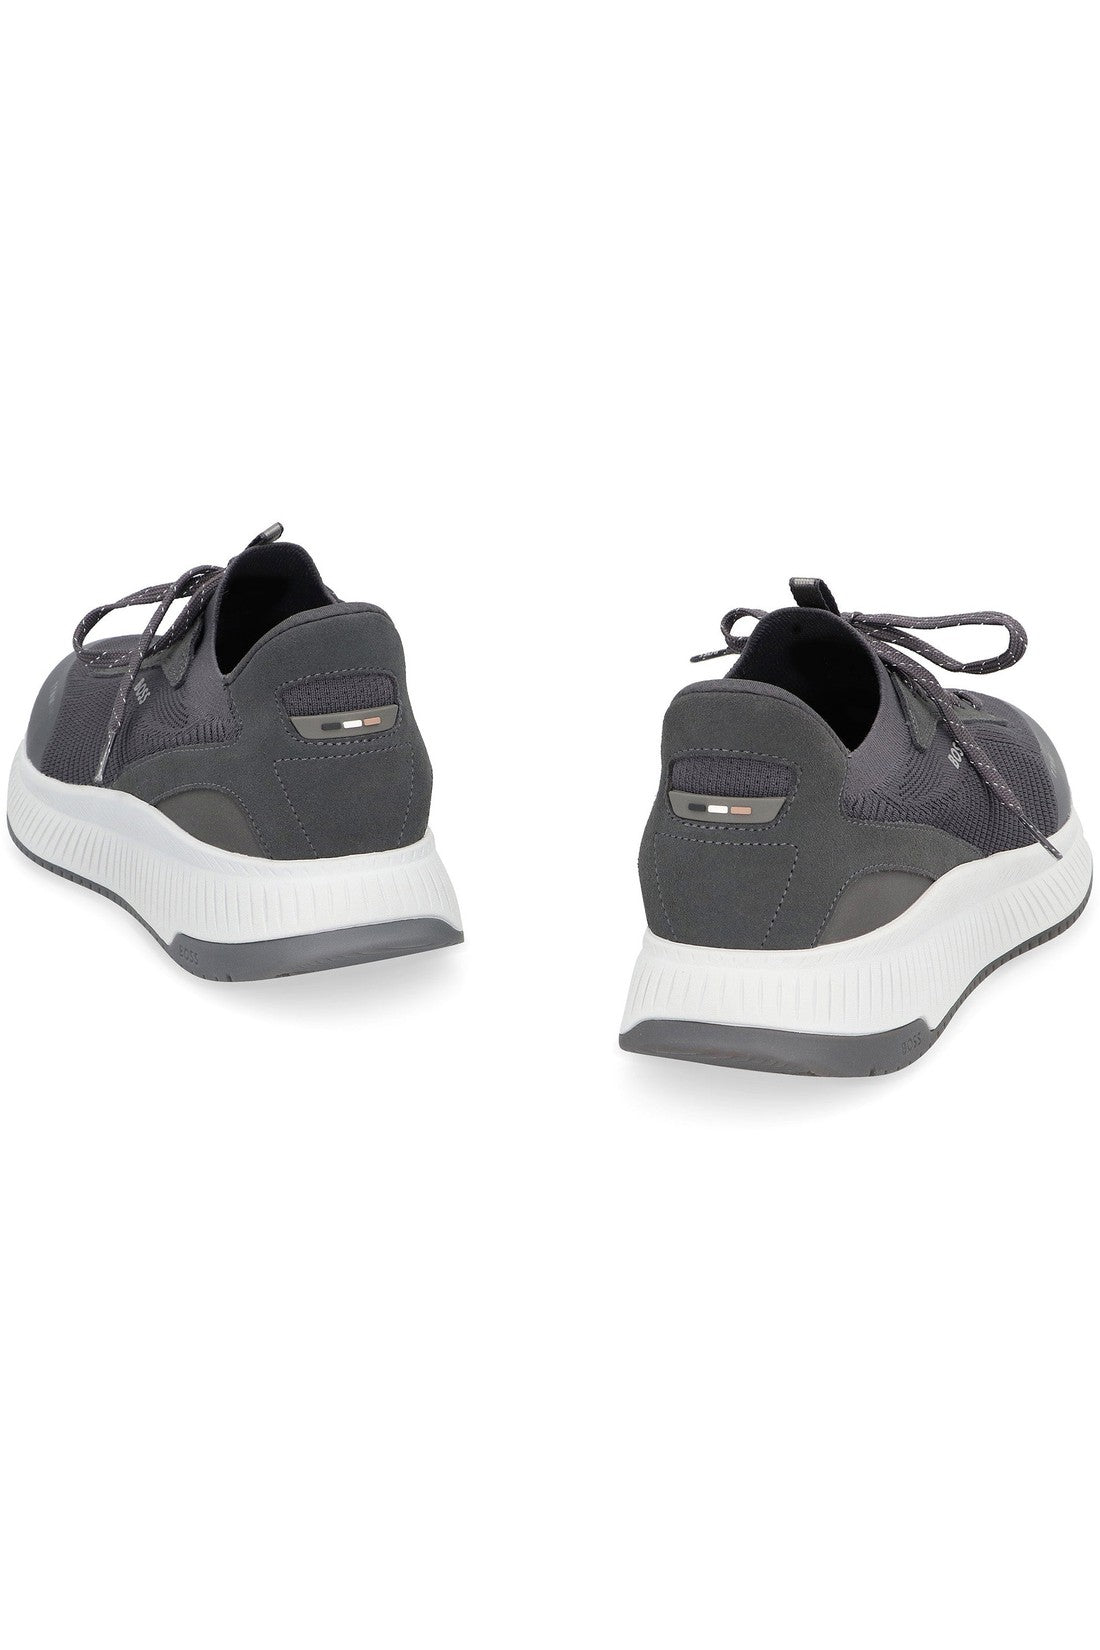 BOSS-OUTLET-SALE-Sock fabric low-top sneakers-ARCHIVIST